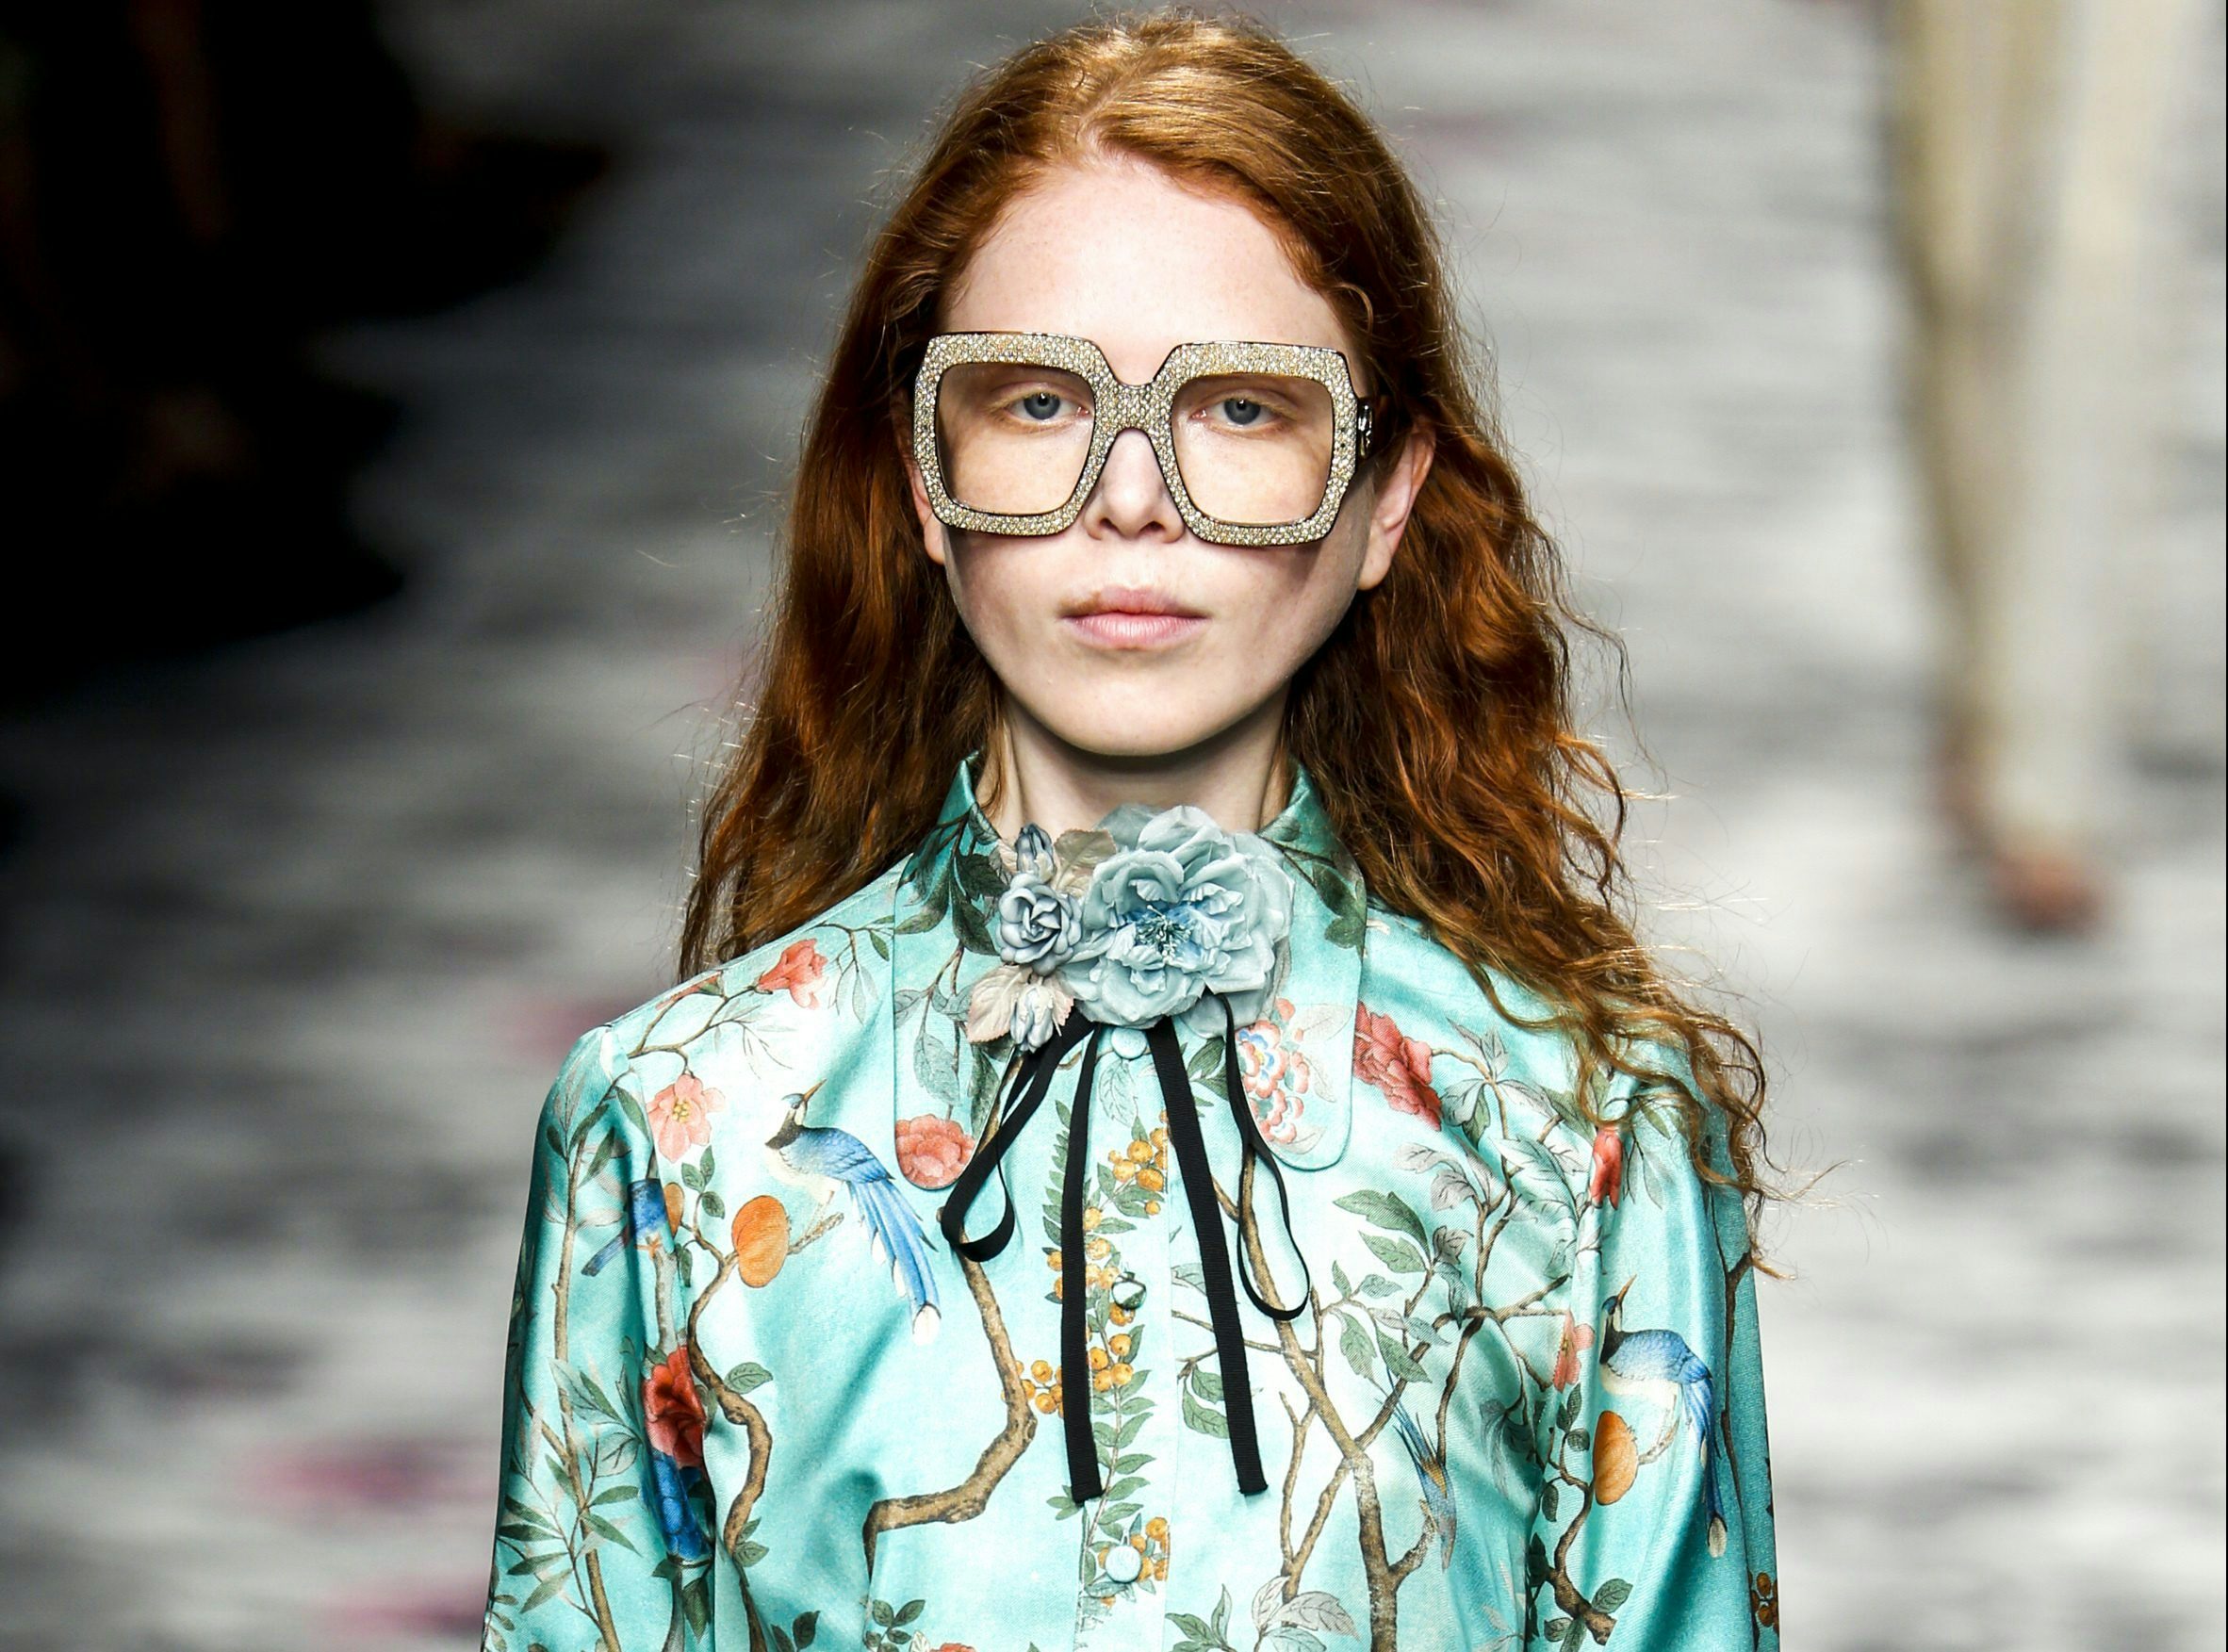 Lawsuit Accuses Kering of Falsely Labeling China-Produced Eyewear as 'Made in Italy'